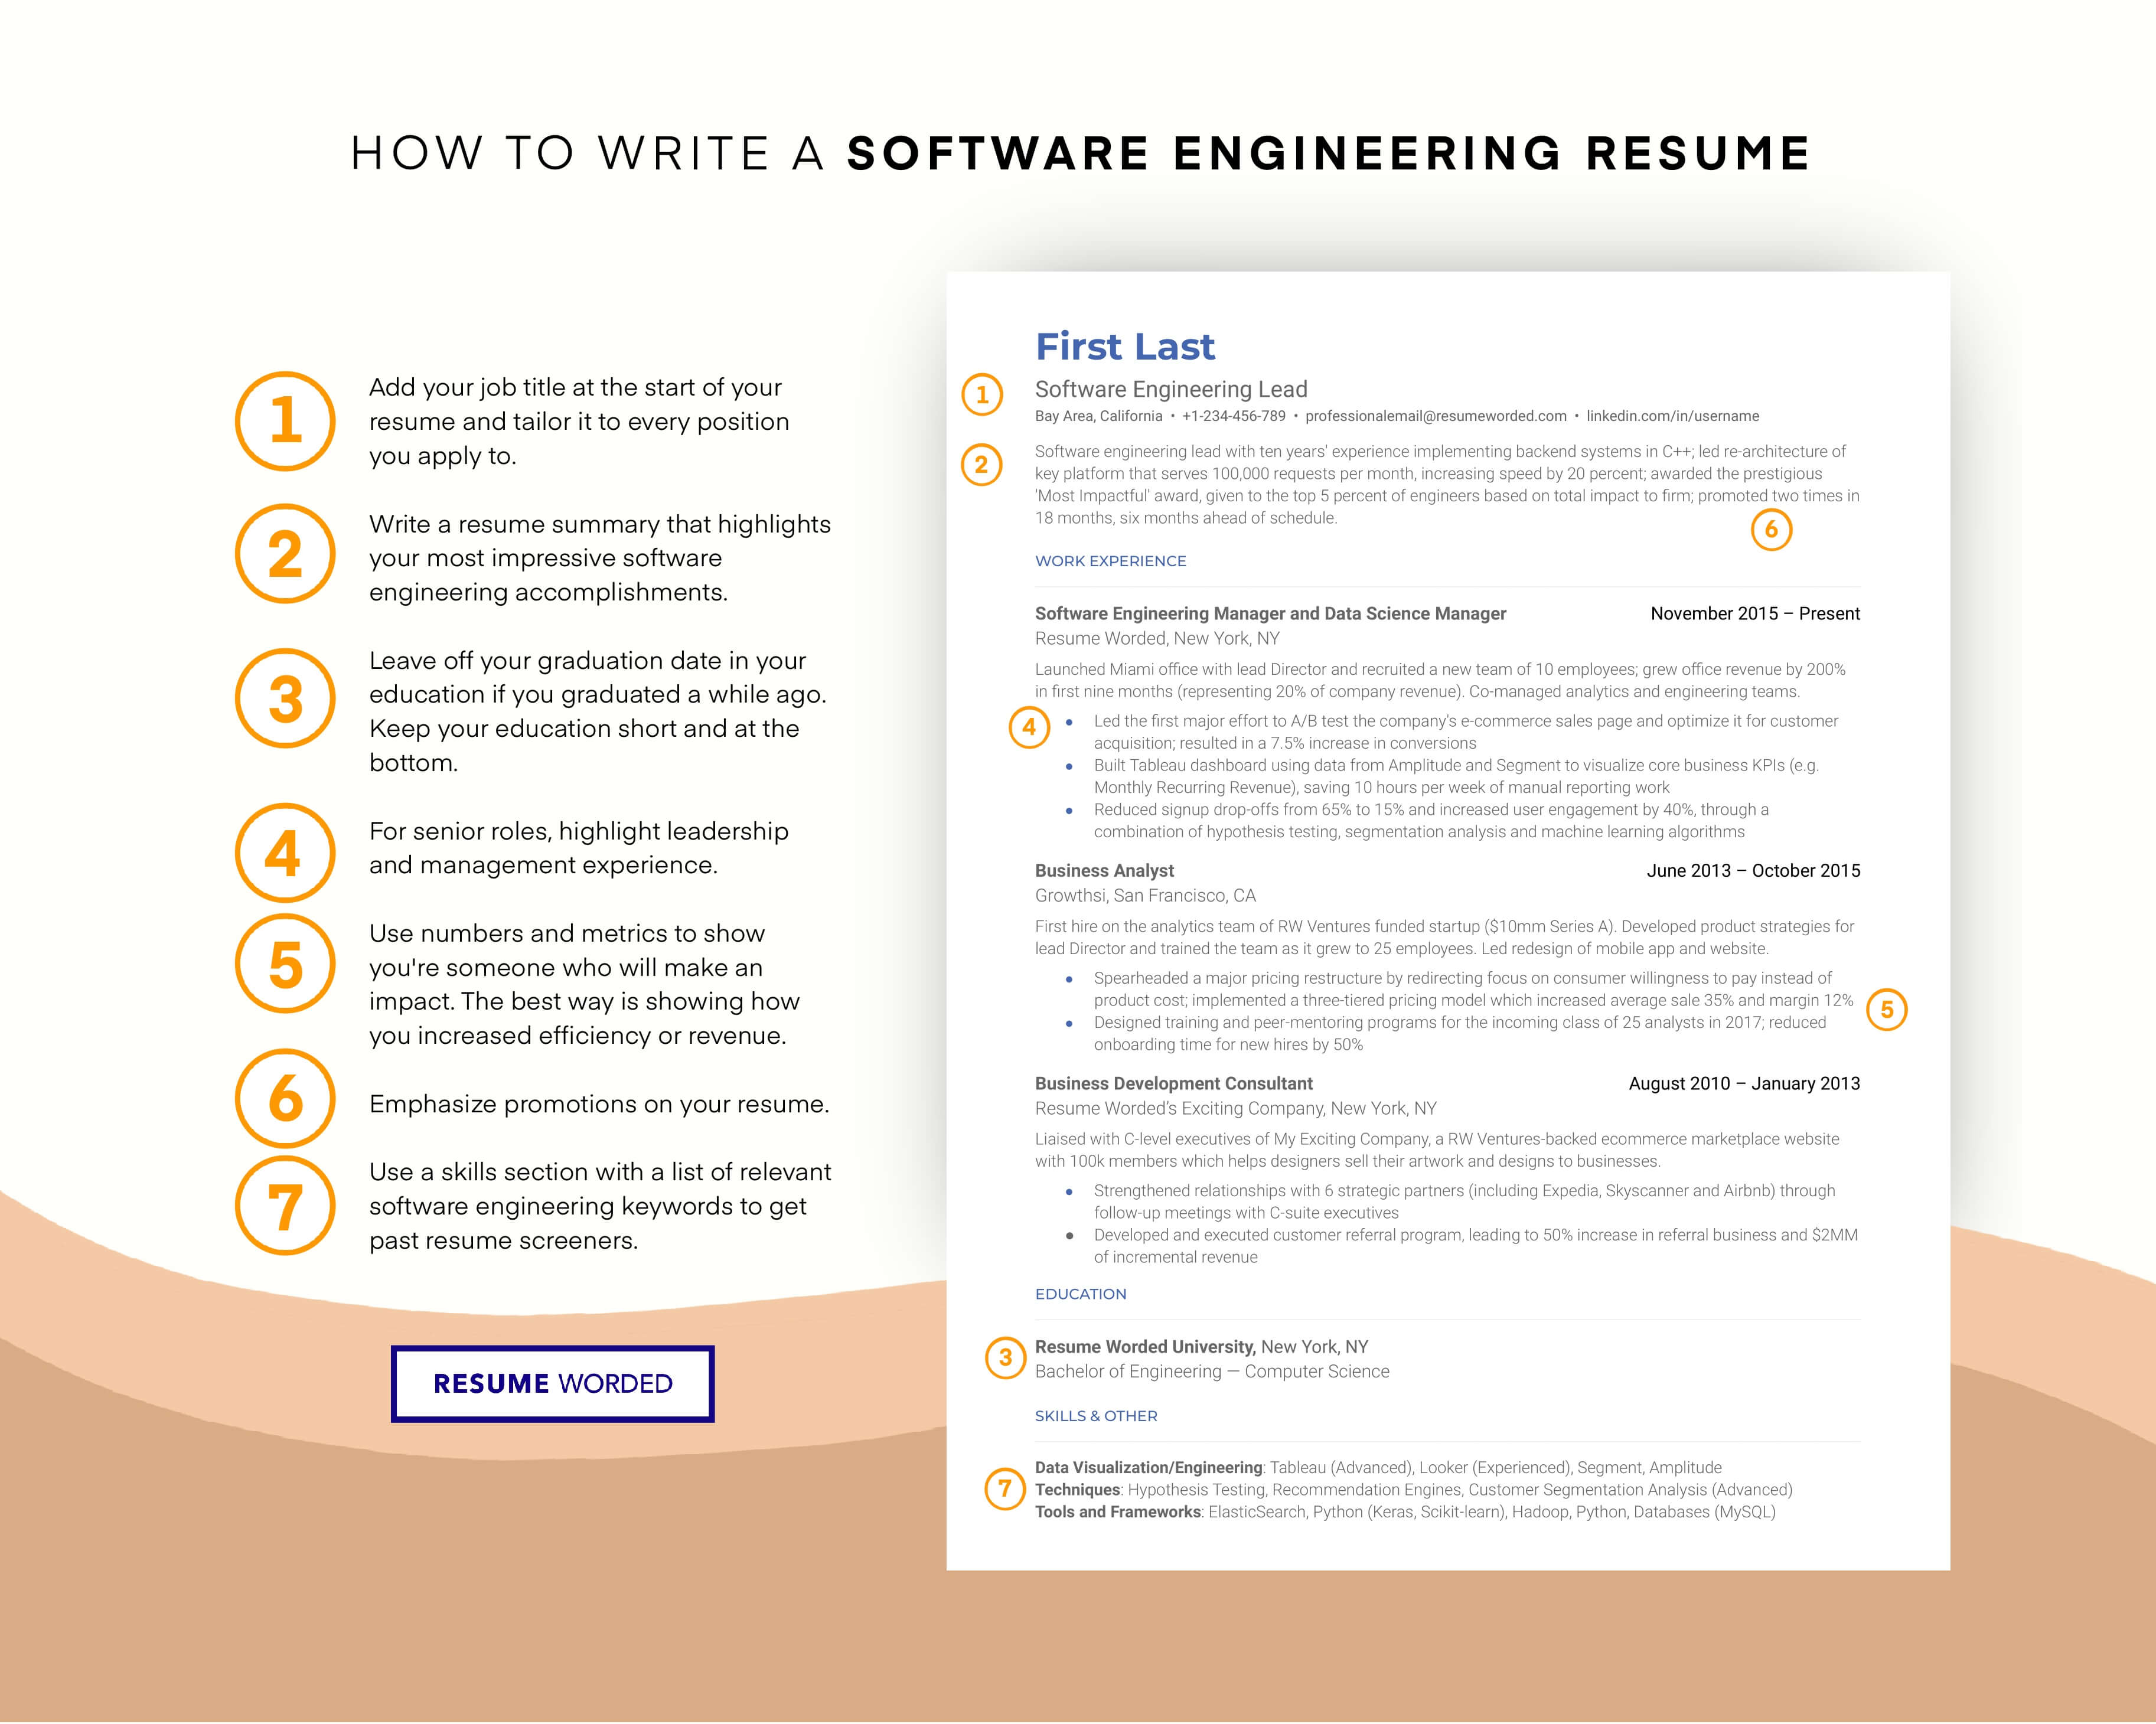 Indicate your ability to implement Agile principles in the software development process. - DevOps Engineer Resume